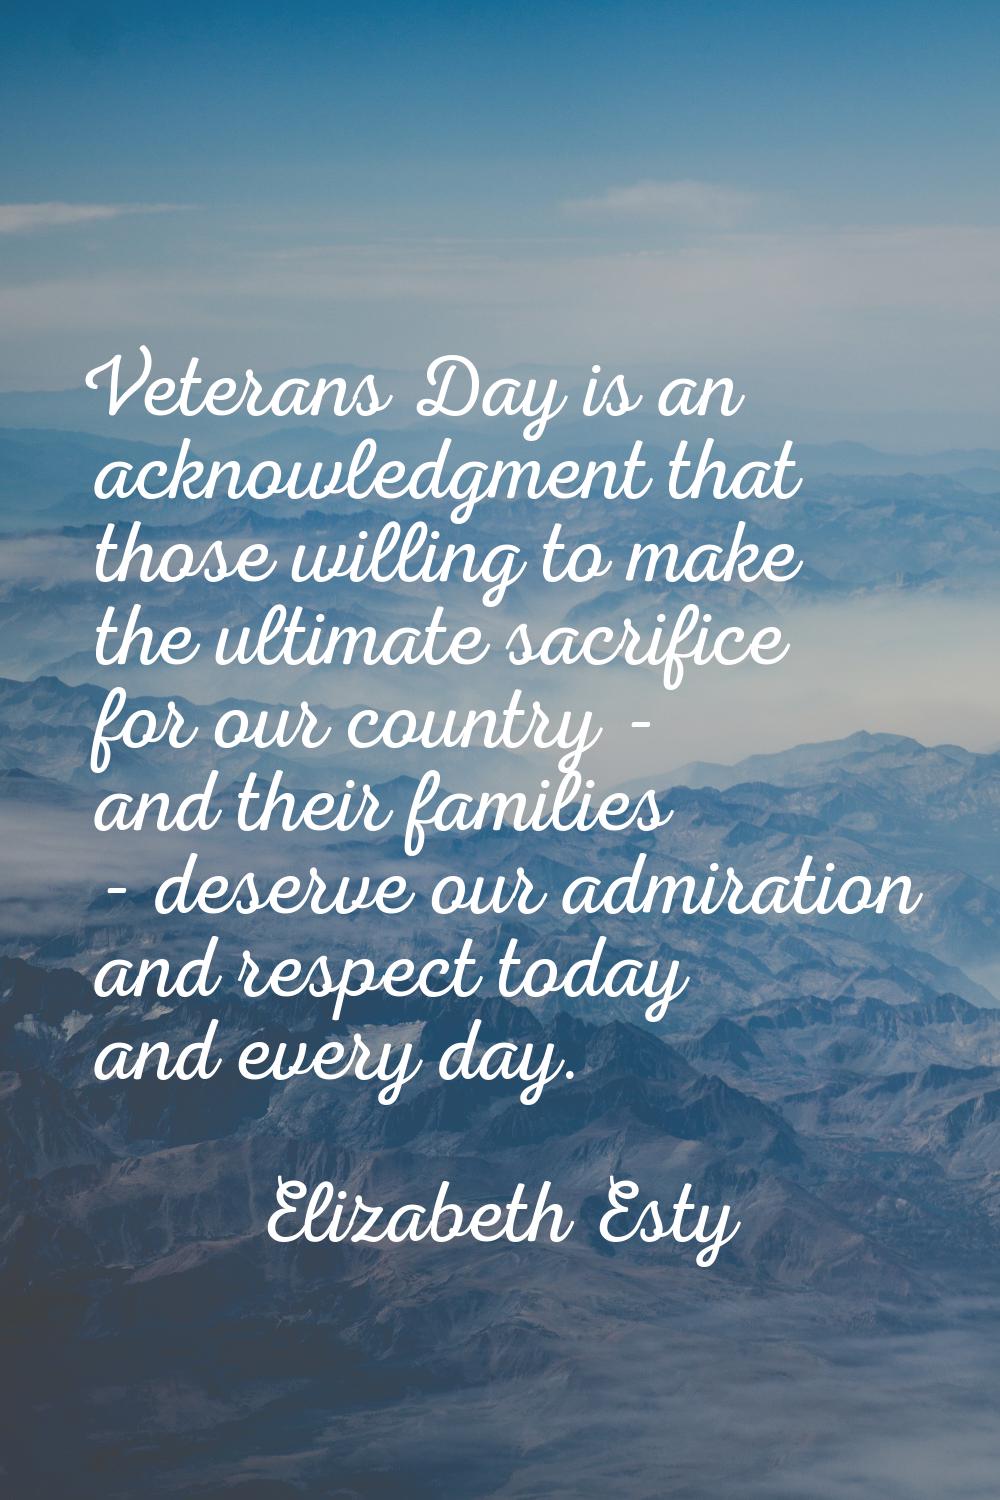 Veterans Day is an acknowledgment that those willing to make the ultimate sacrifice for our country